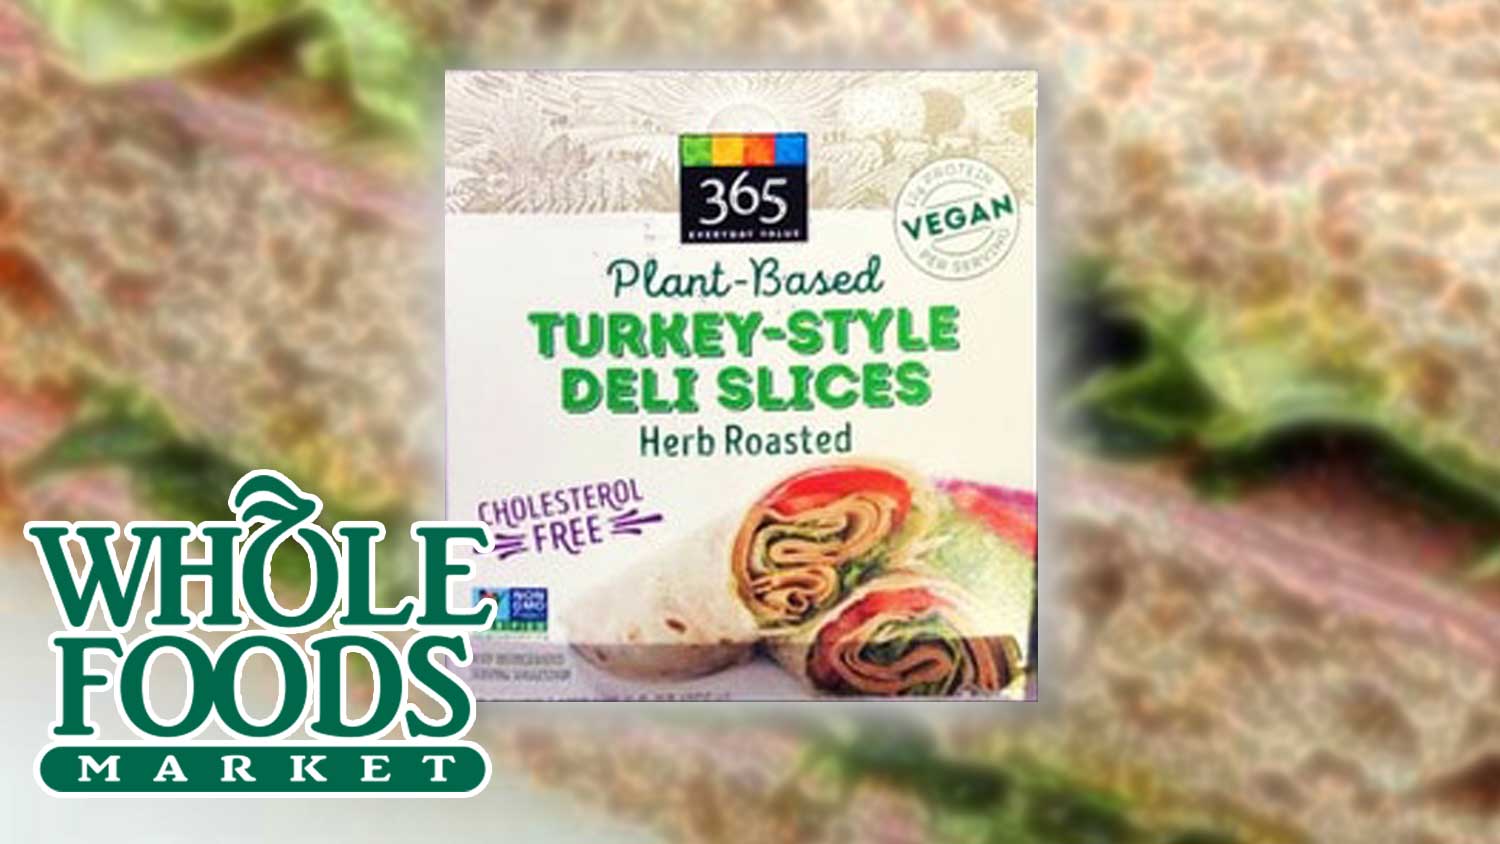 You Can Now Get Vegan Turkey Slices Made By Whole Foods Market